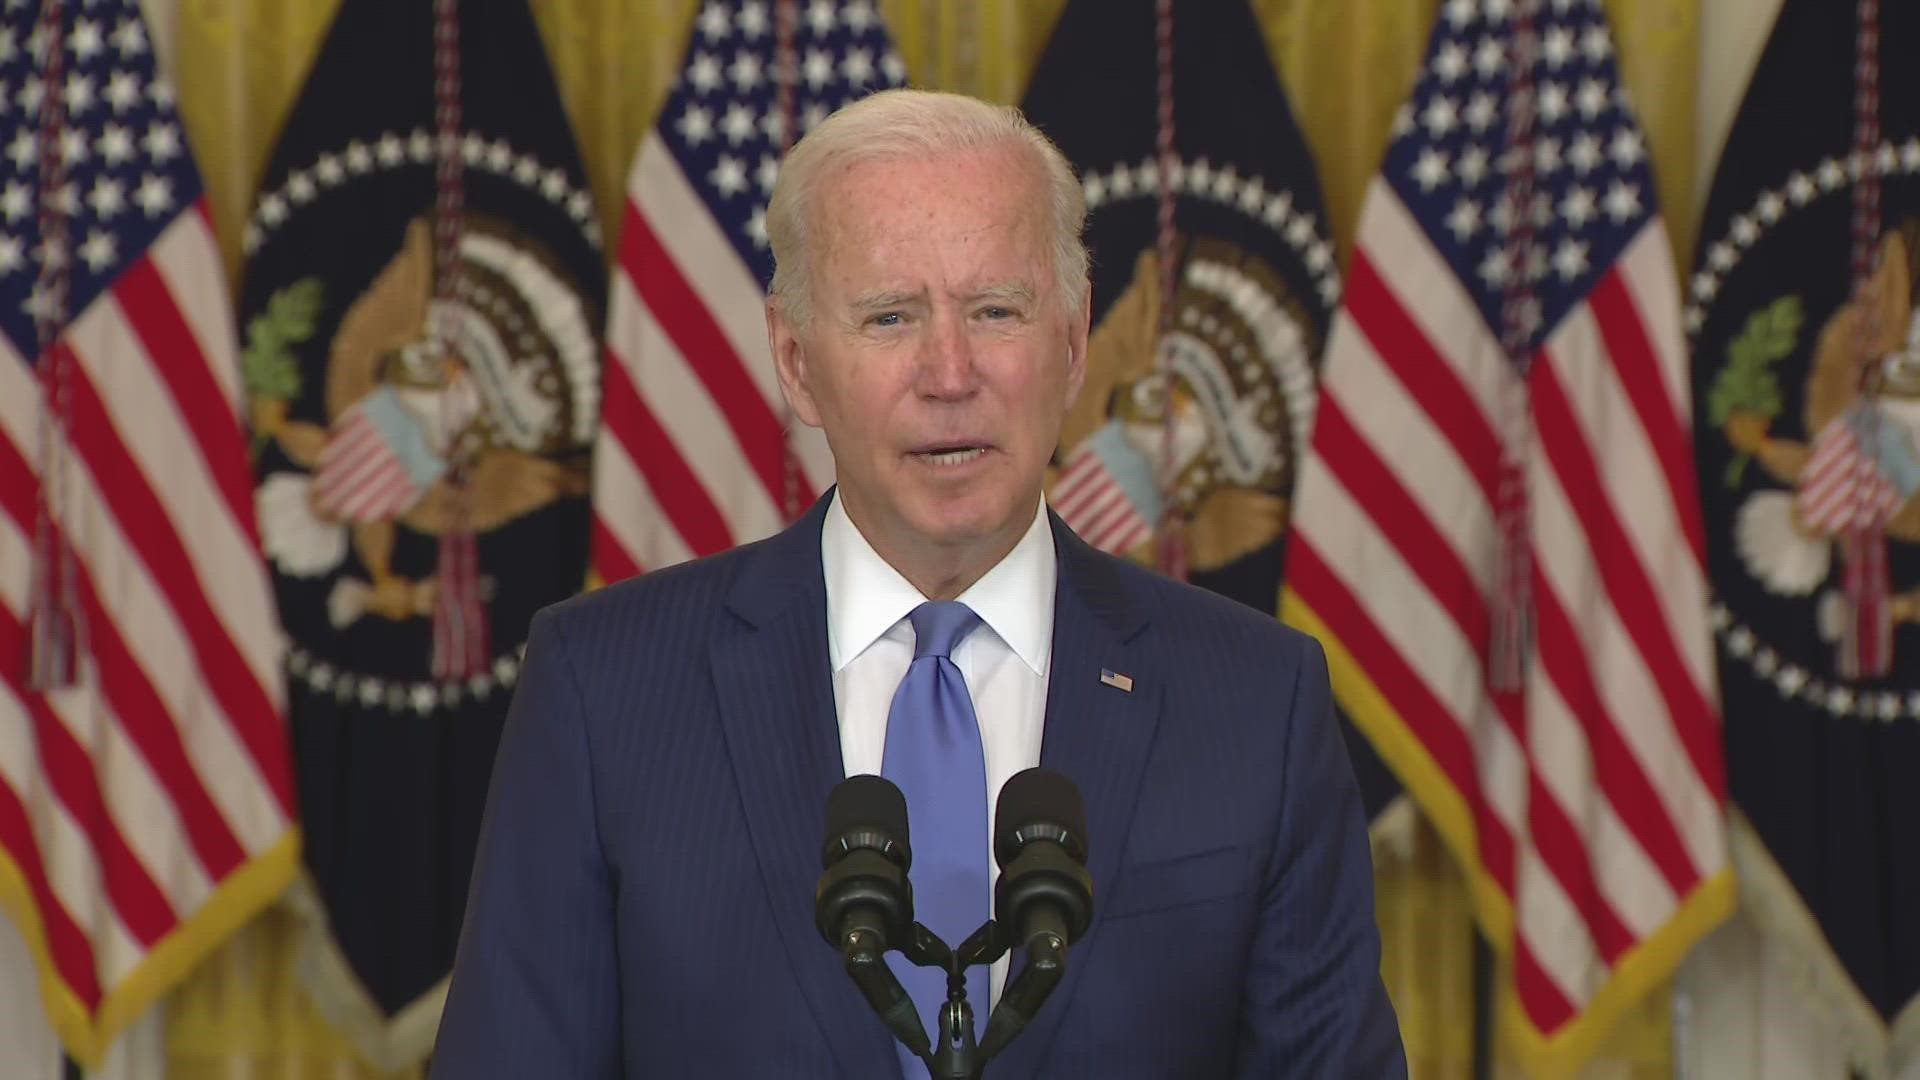 Speaking Thursday, President Joe Biden said it was time for large American corporations to pay higher taxes, considering billionaires' pandemic wealth increases.